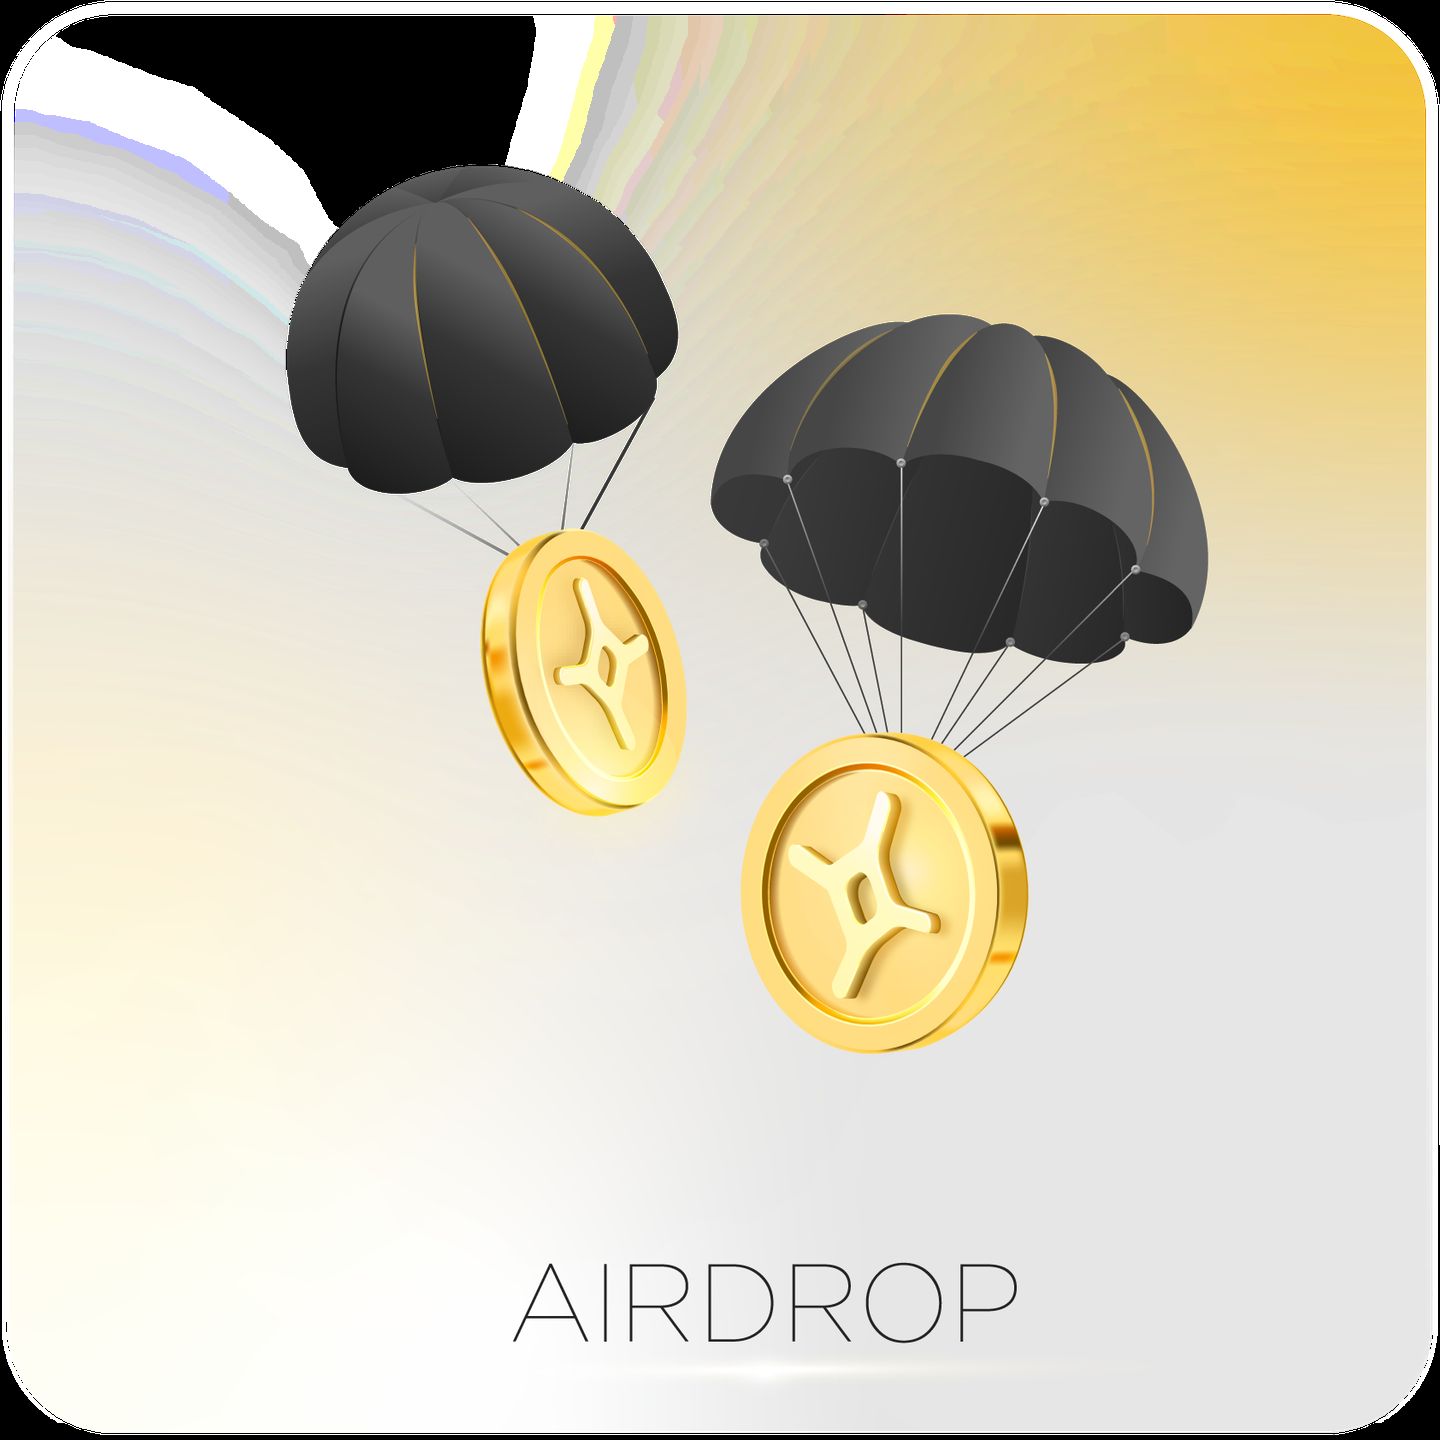 Dick pic airdrop nyc